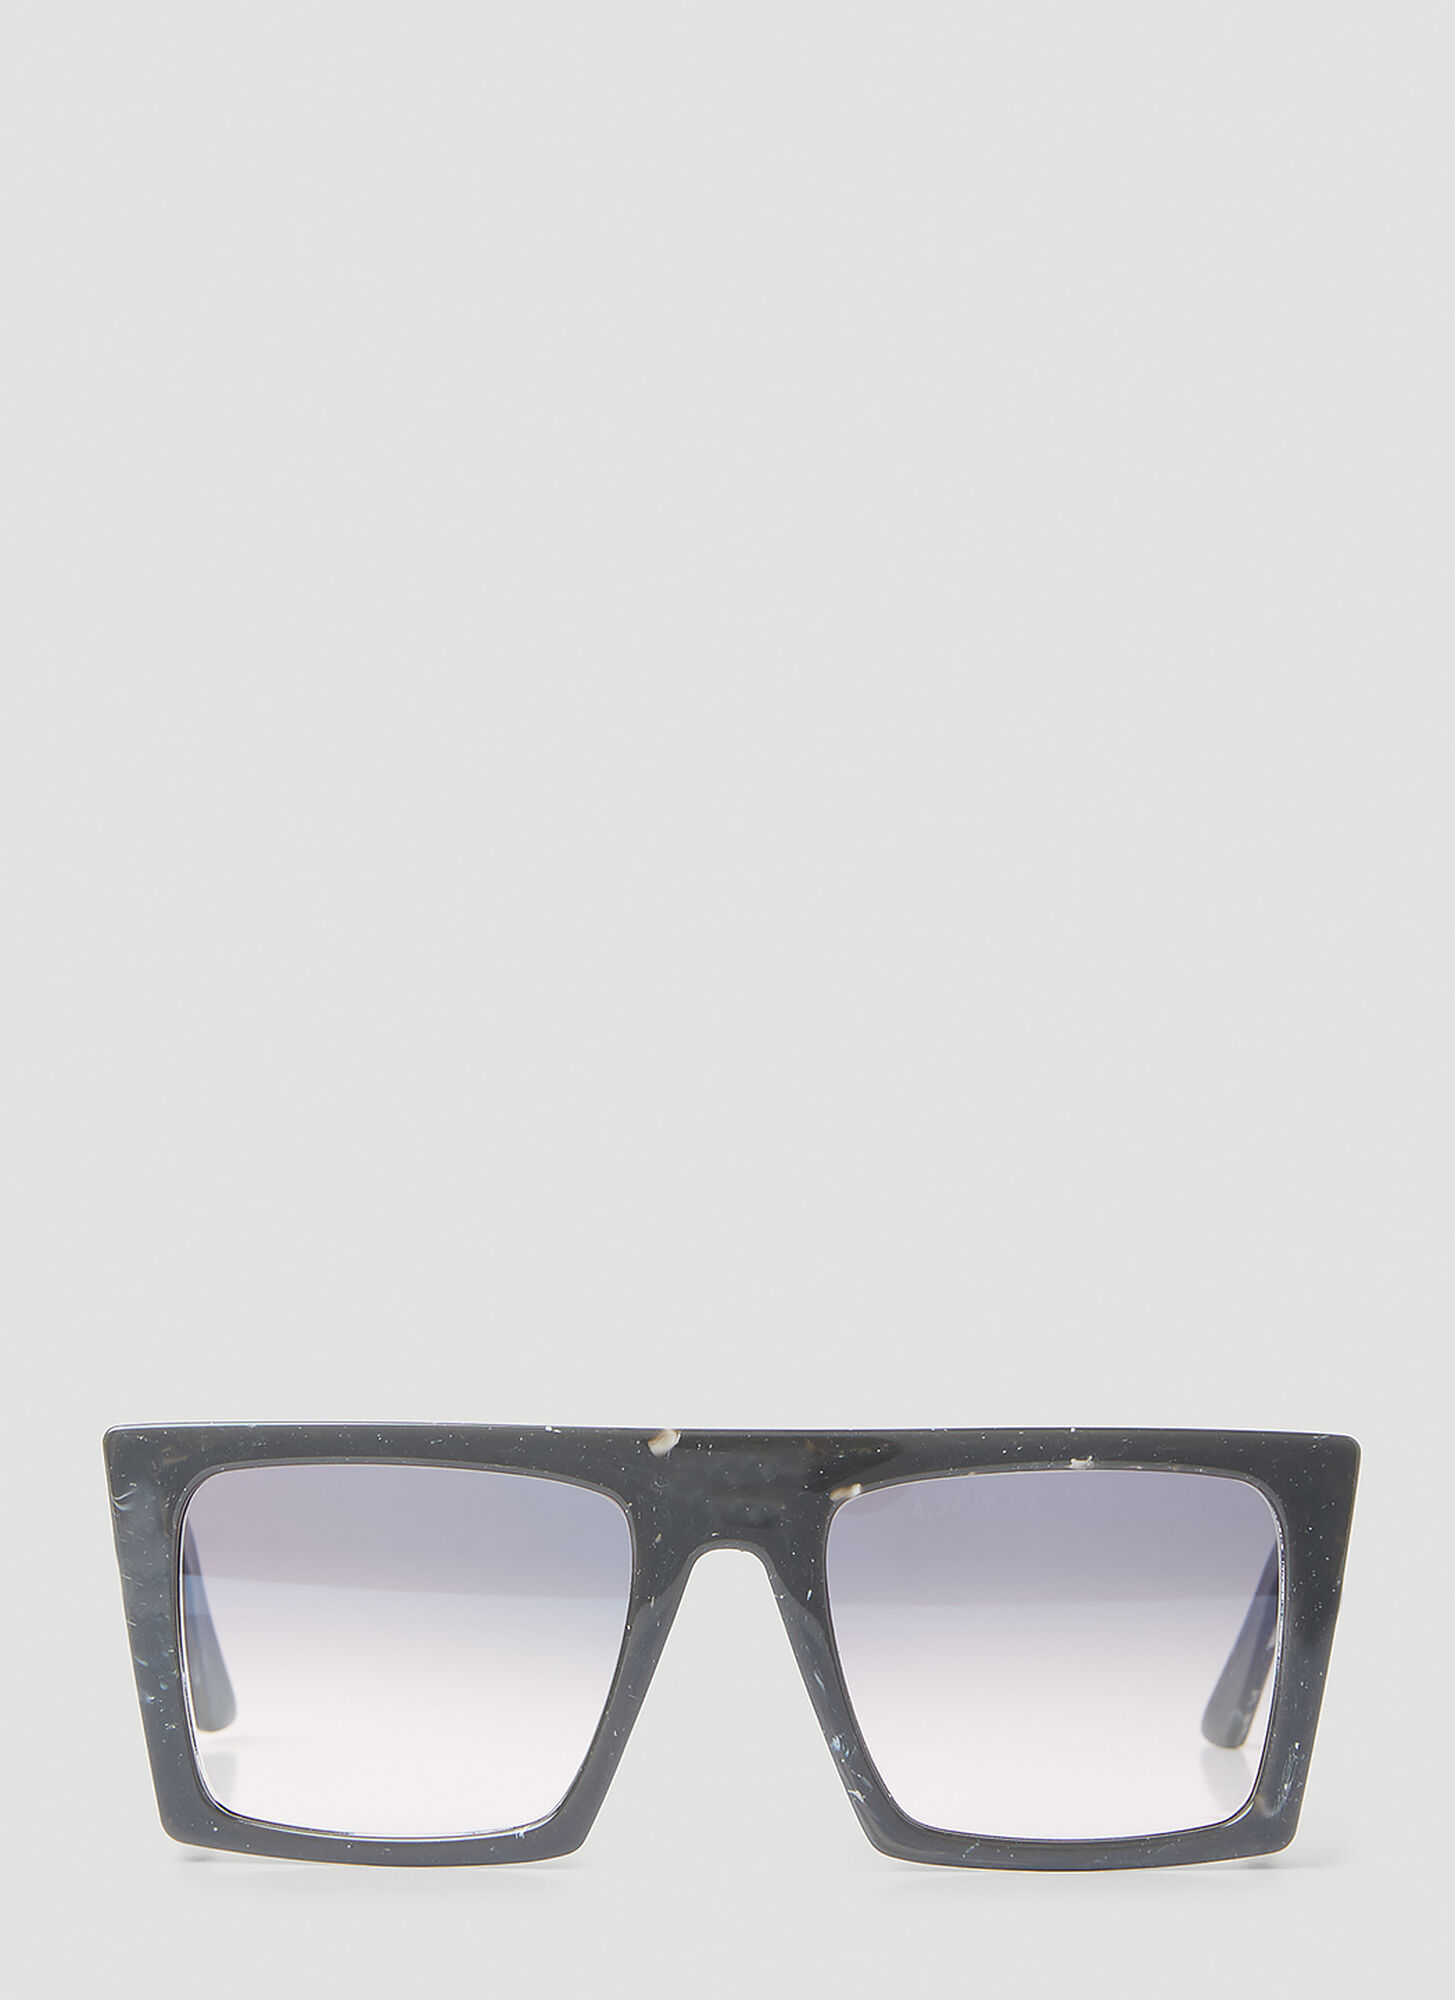 Clean Waves Type 3 Tall Marbled Sunglasses Unisex Grey